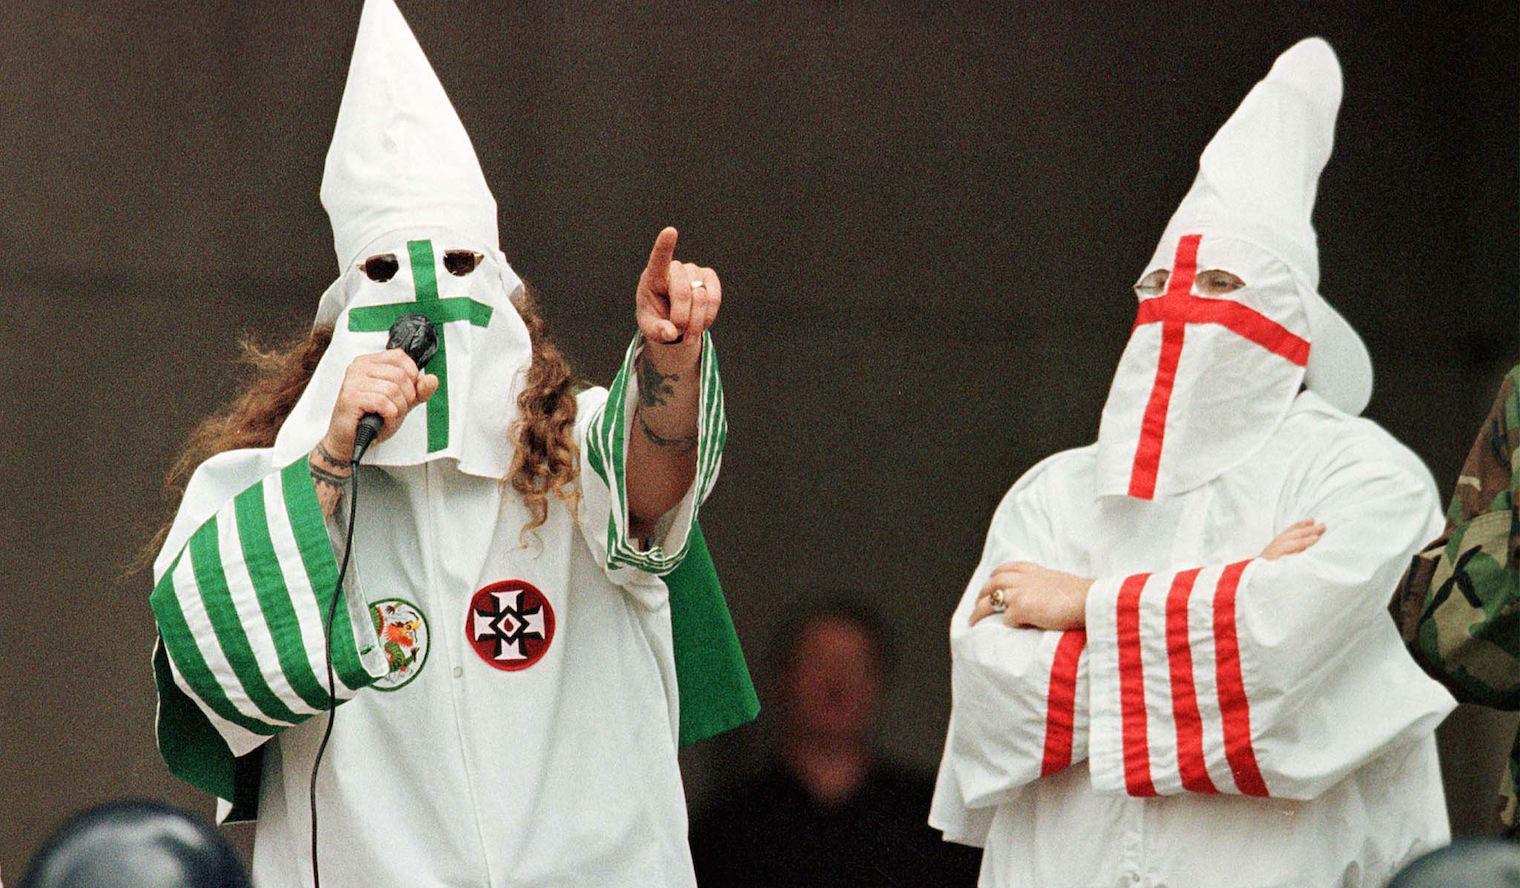 File photo: A KKK rally on 21 August 1999 in Cleveland, Ohio. A middle school teacher in Pulaski County, Kentucky, was suspended after she allowed a student to dress up as a KKK grand wizard as part of a history project